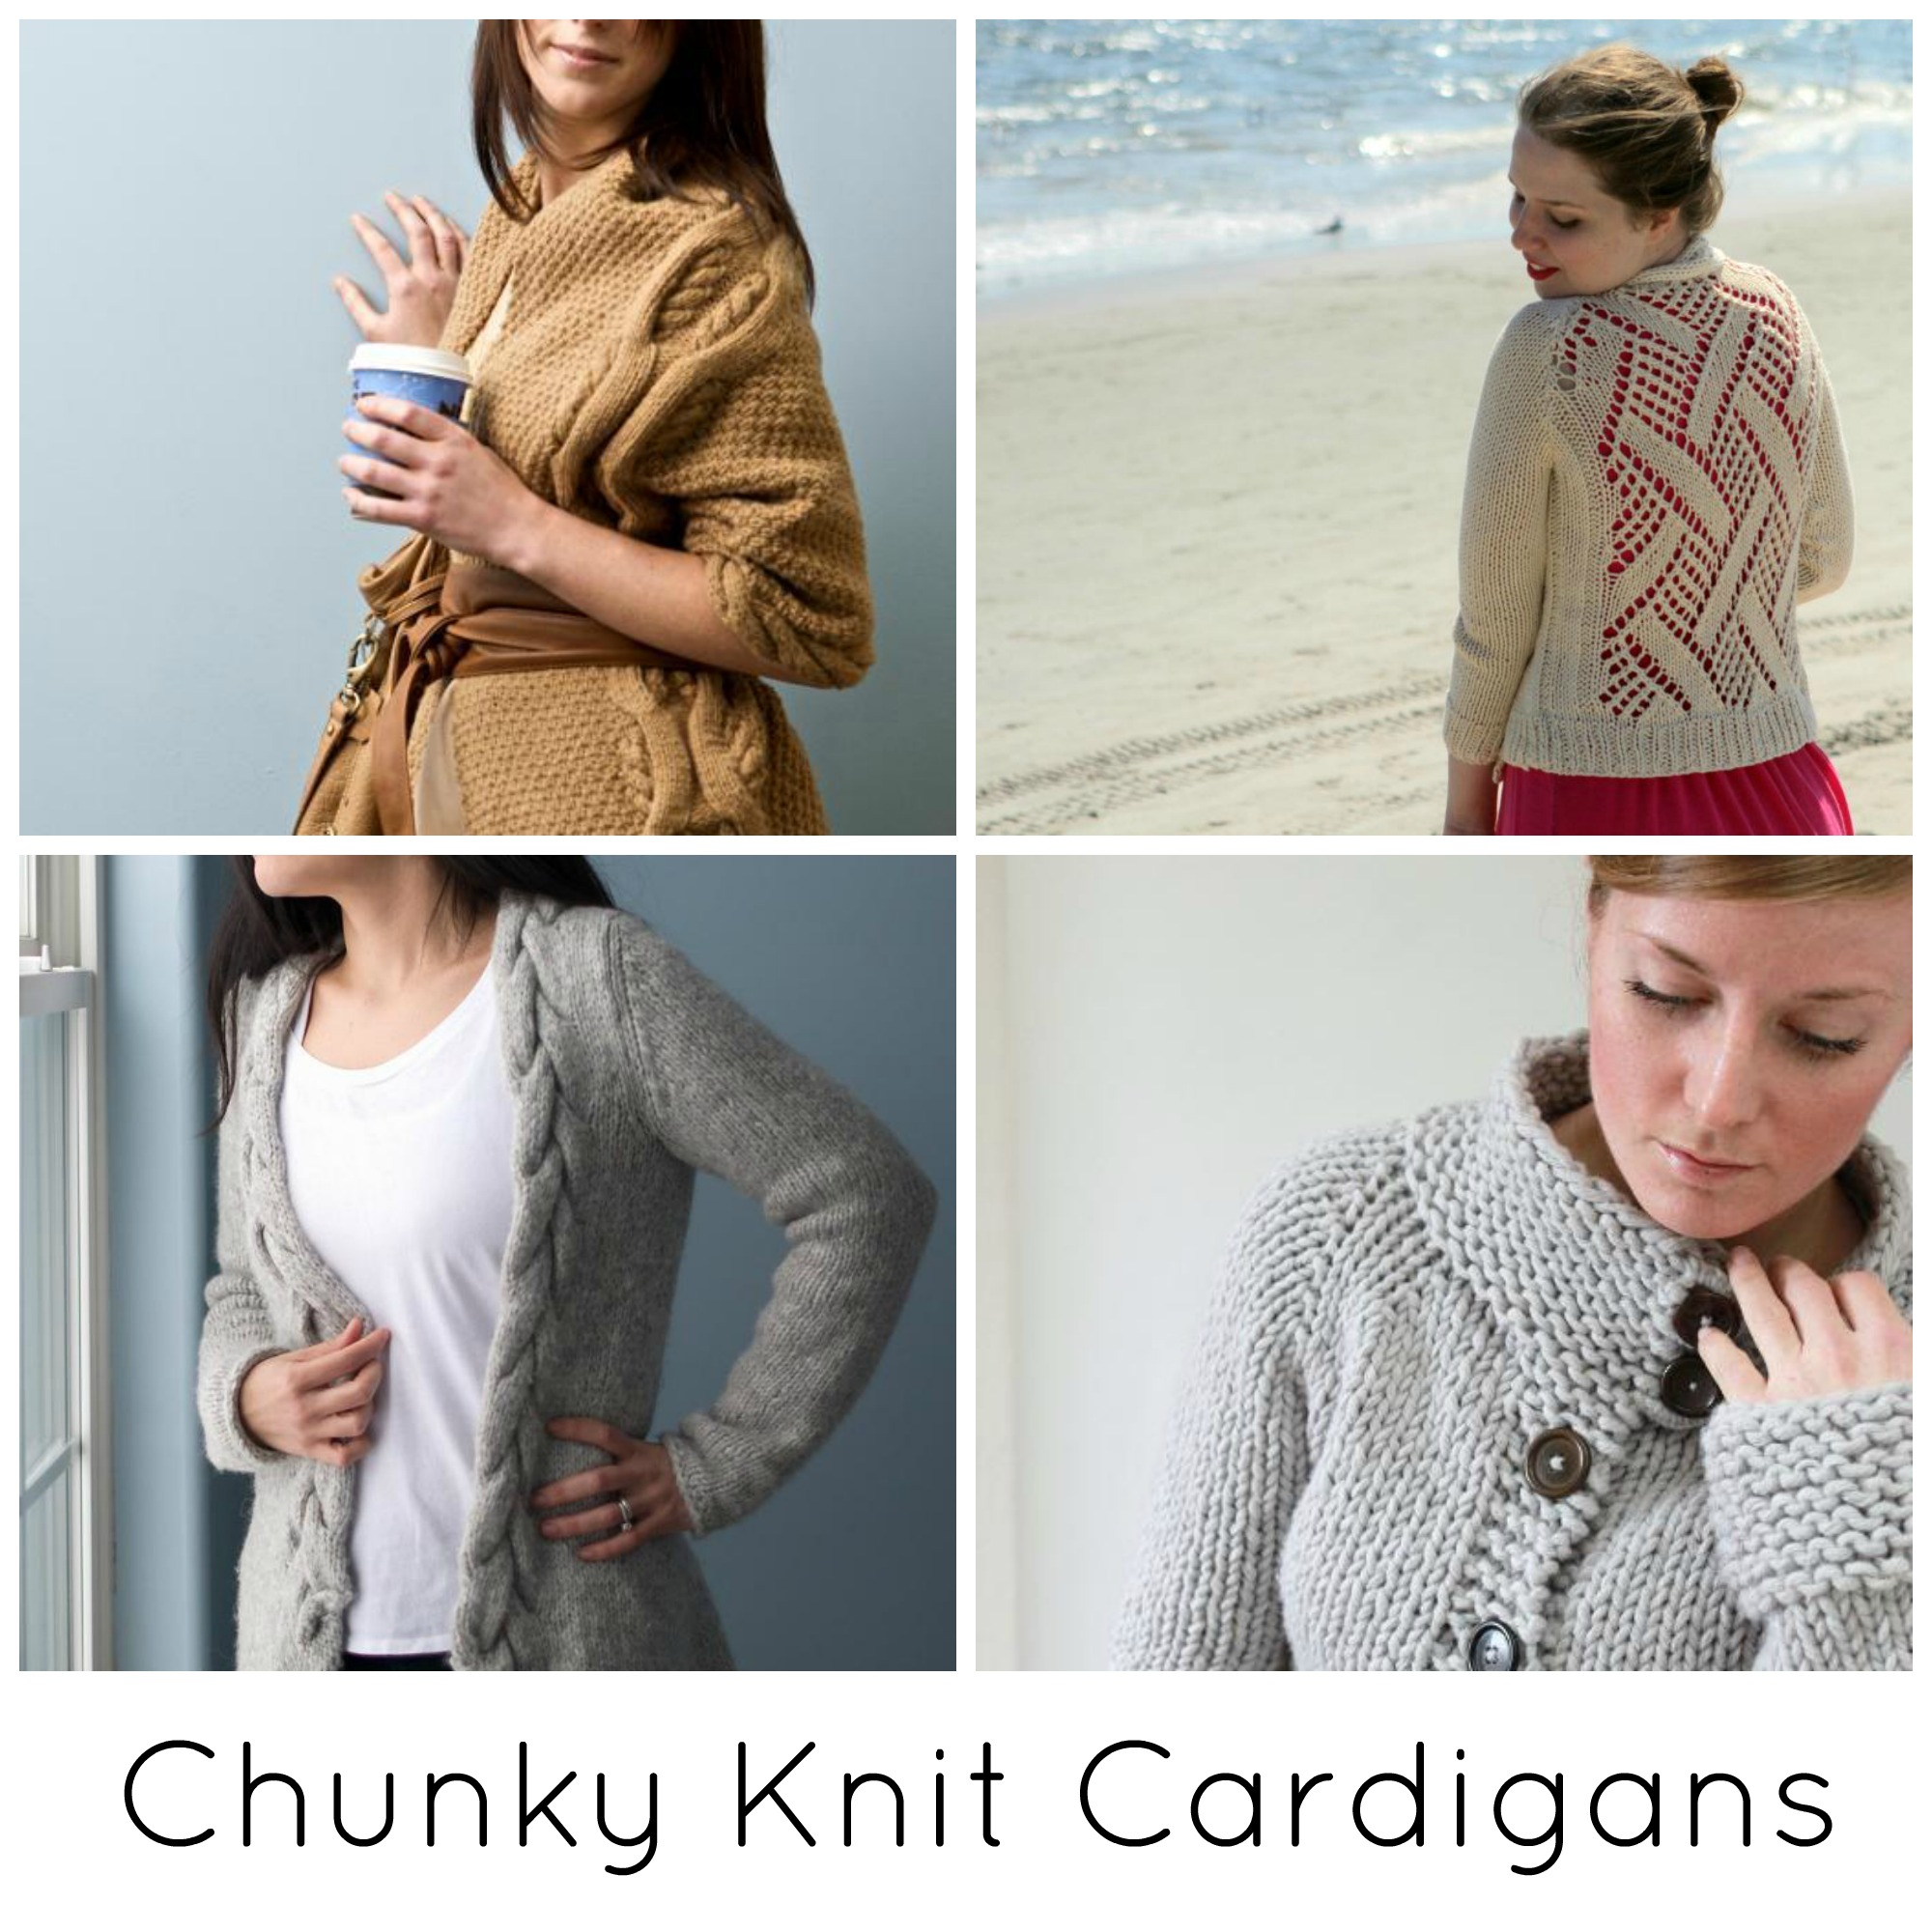 Jumper Knitting Patterns The Coziest Chunky Knit Cardigan Patterns Ever